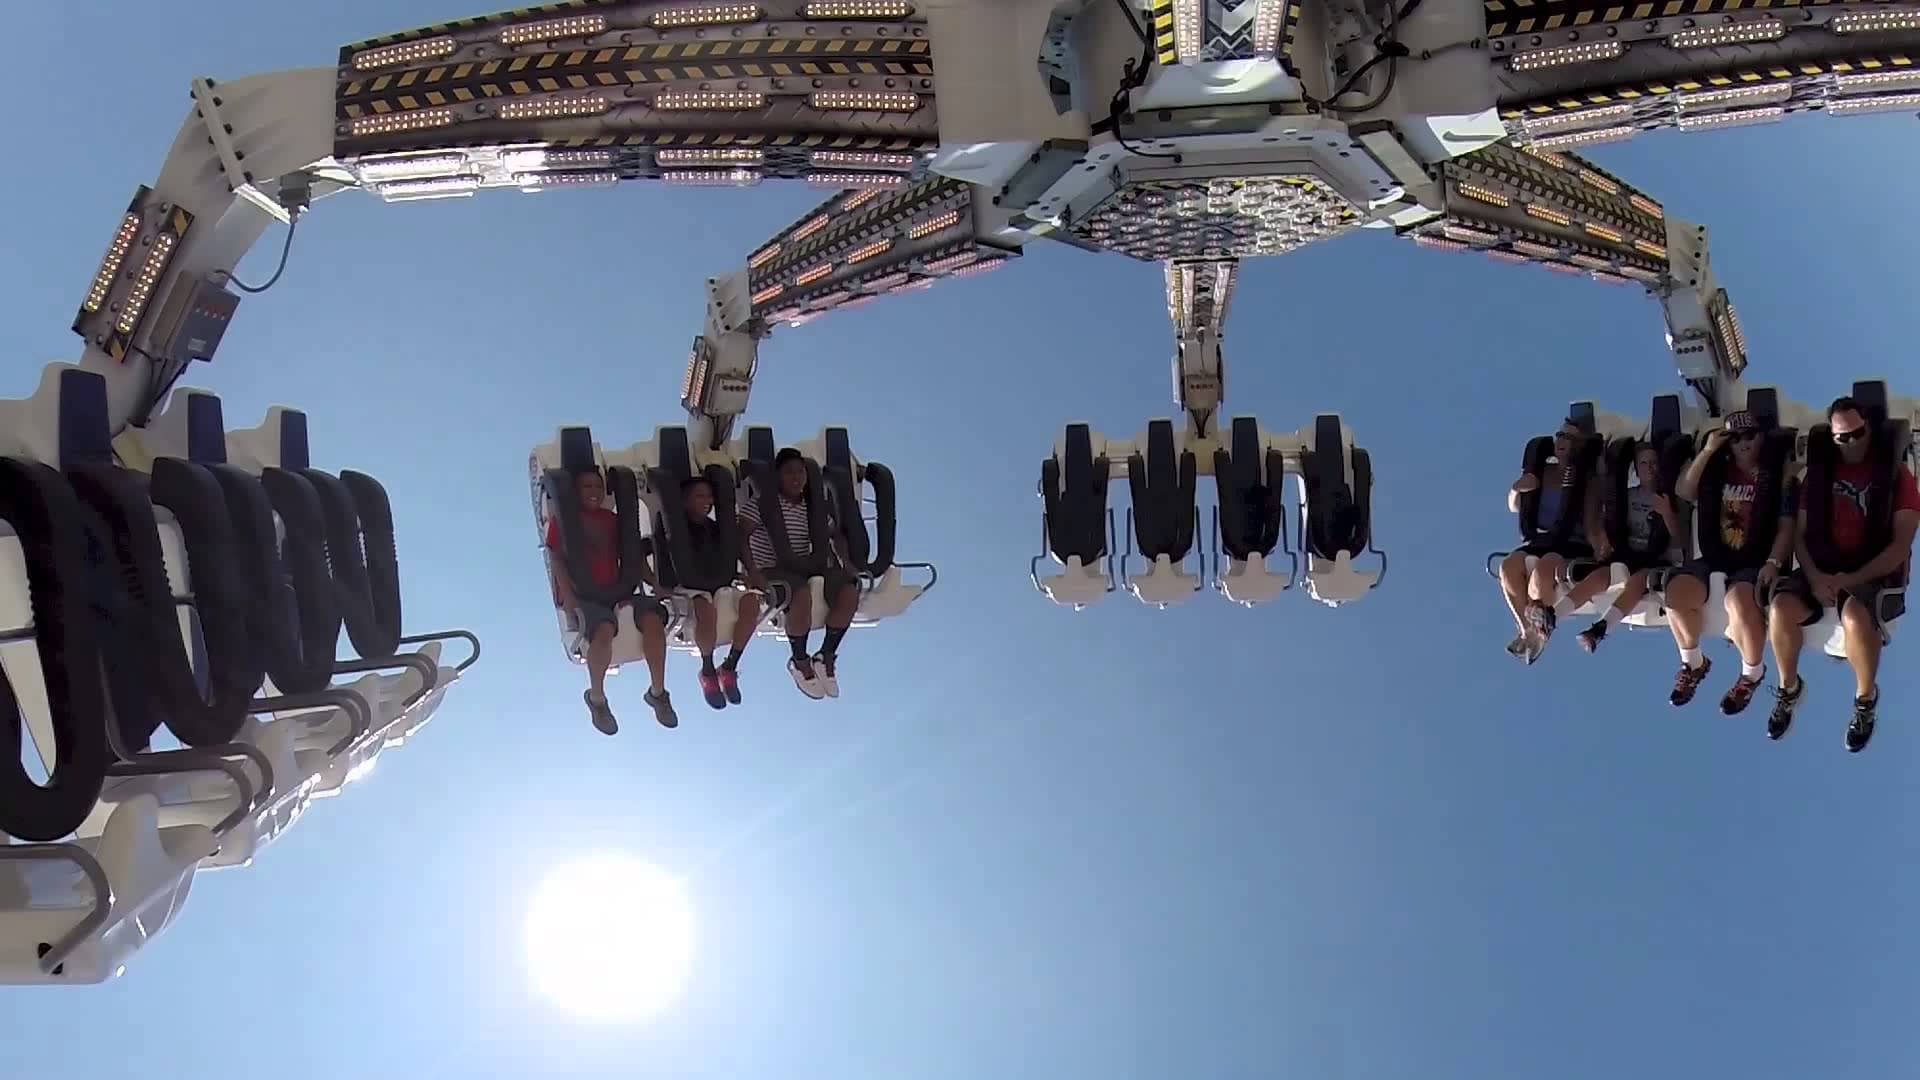 OC Fair Shuts Down G Force Ride after Deadly Accident in Ohio image courtesy of www.theorangecountyregister.com